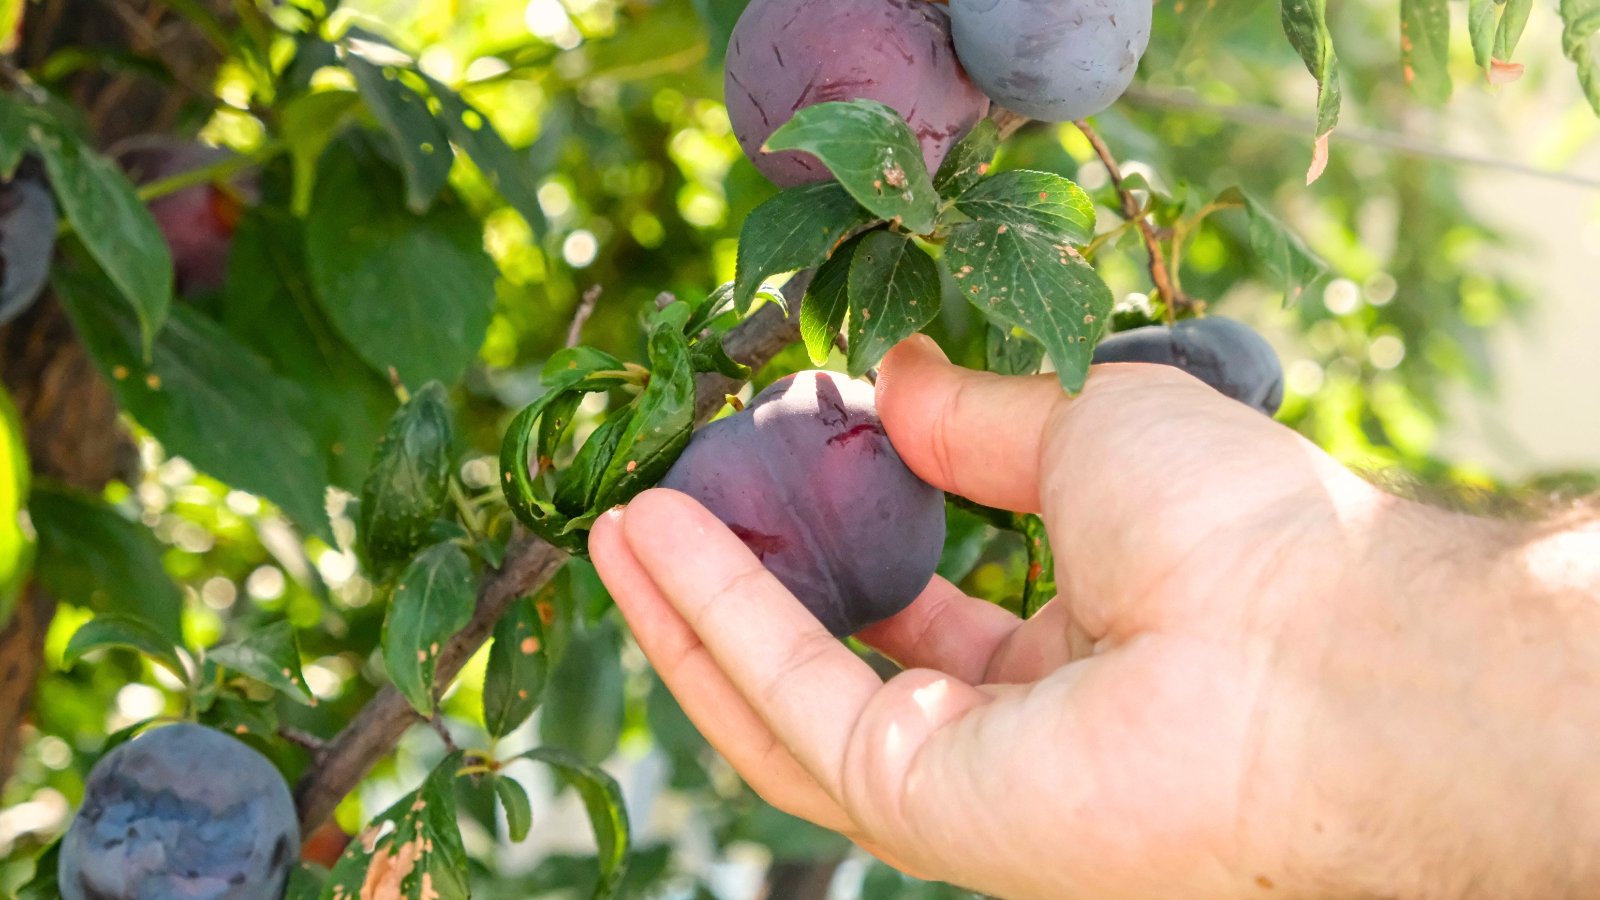 Close-up of a man's hand picking ripe purple plum fruits from a tree in a sunny garden.